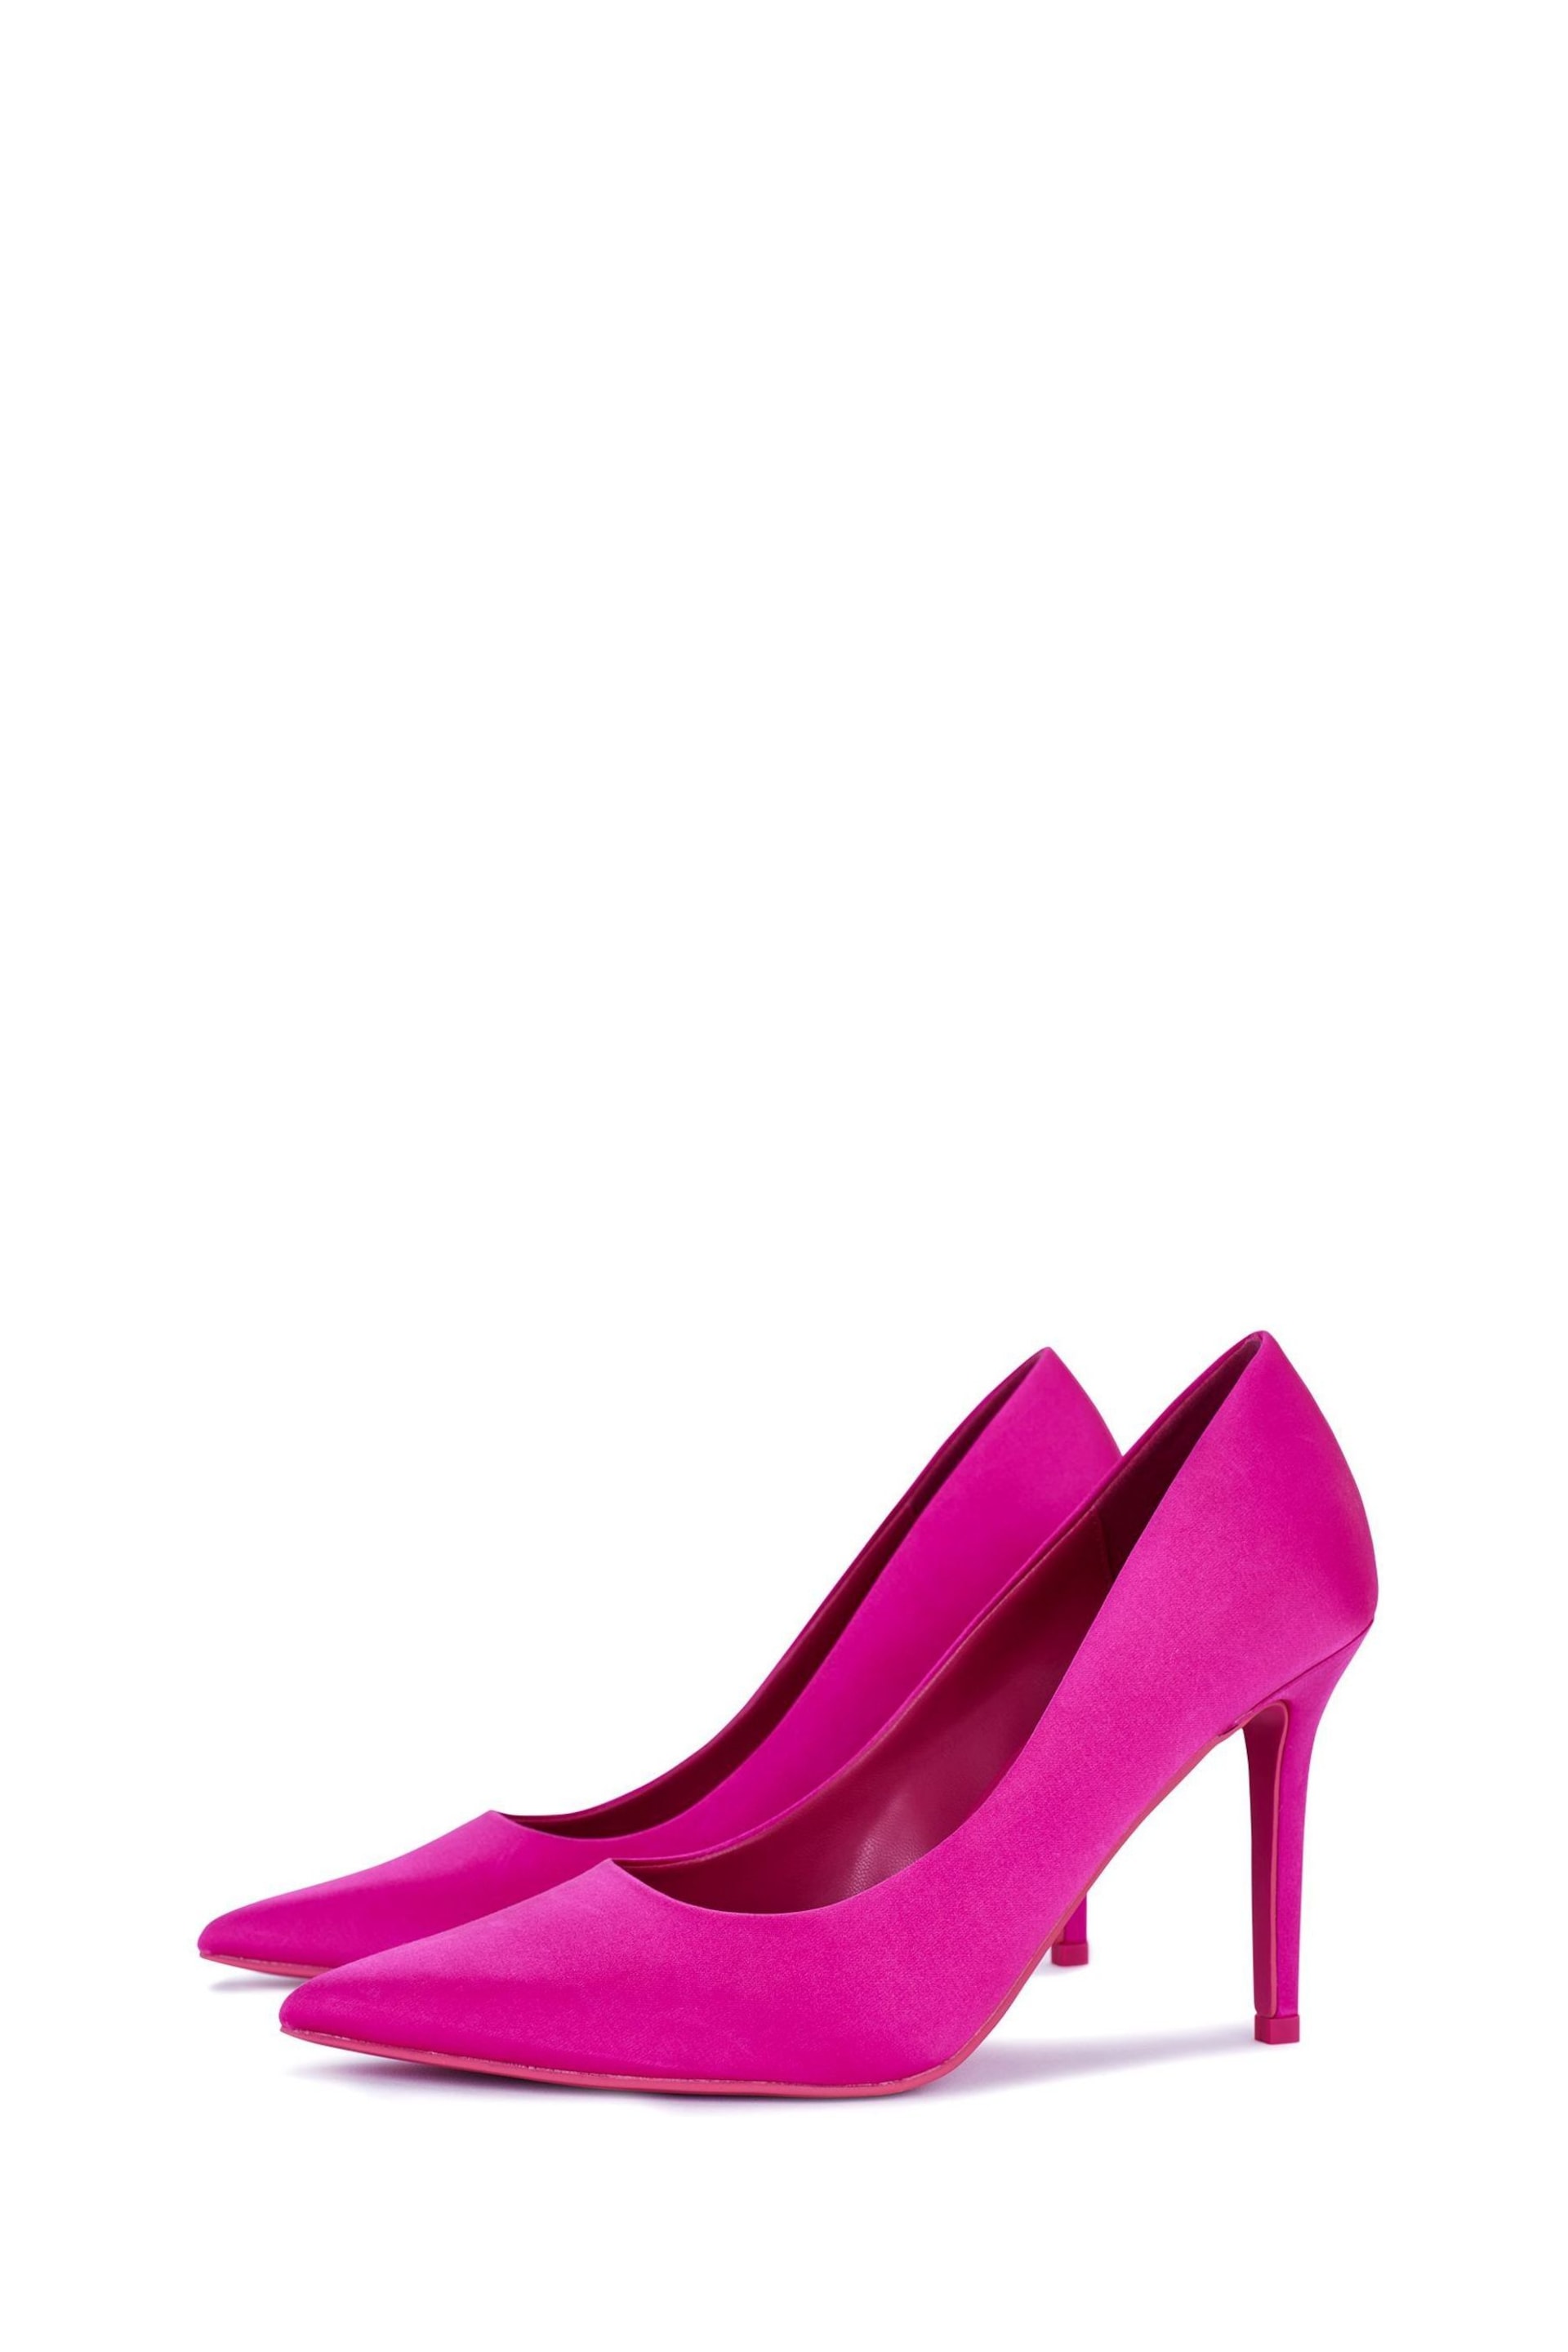 Novo Pink Crissy Court Shoes - Image 3 of 5